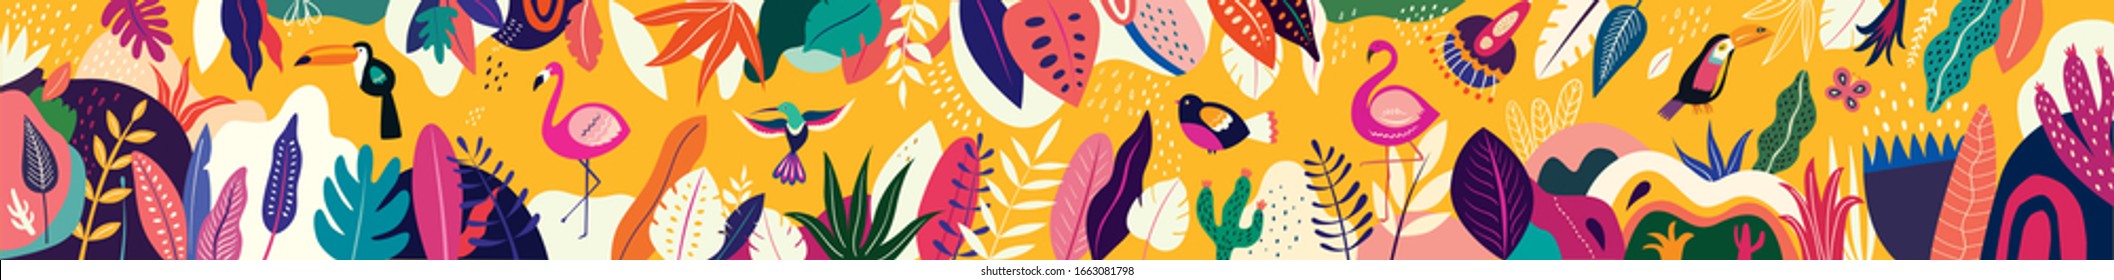 Animals big collection. Animals of Brazil. Vector colorful set of illustrations with tropical flowers, leaves, monkey, flamingo, and birds. Brazil tropical pattern. Rio de janeiro pattern